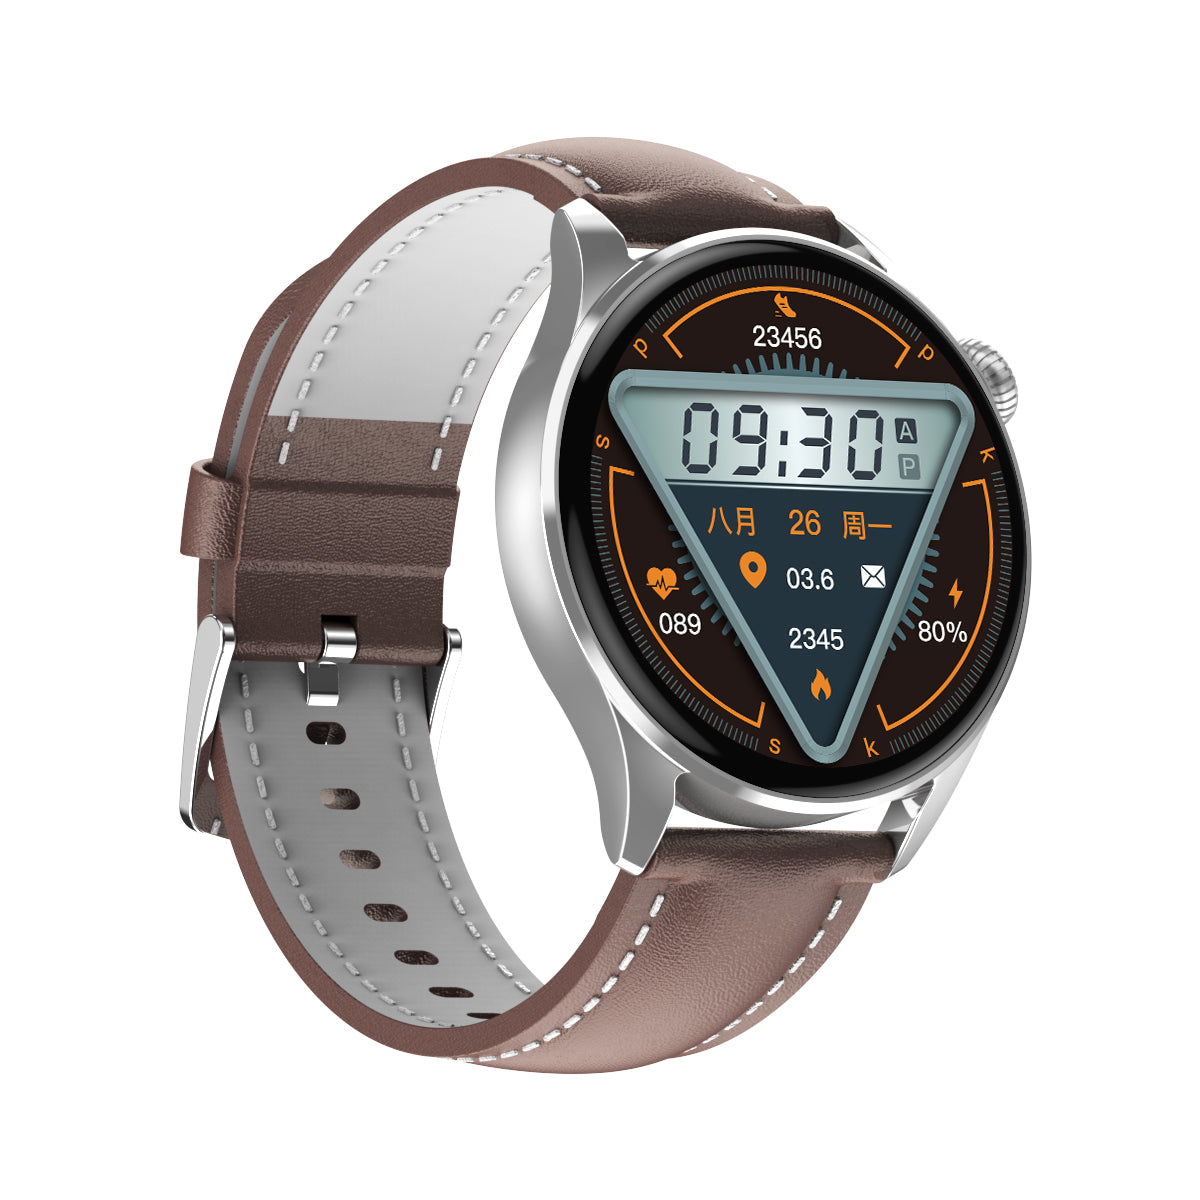 Bearscome Q3 Max Blood glucose oxygen blood pressure monitor Compass altitude barometric function.